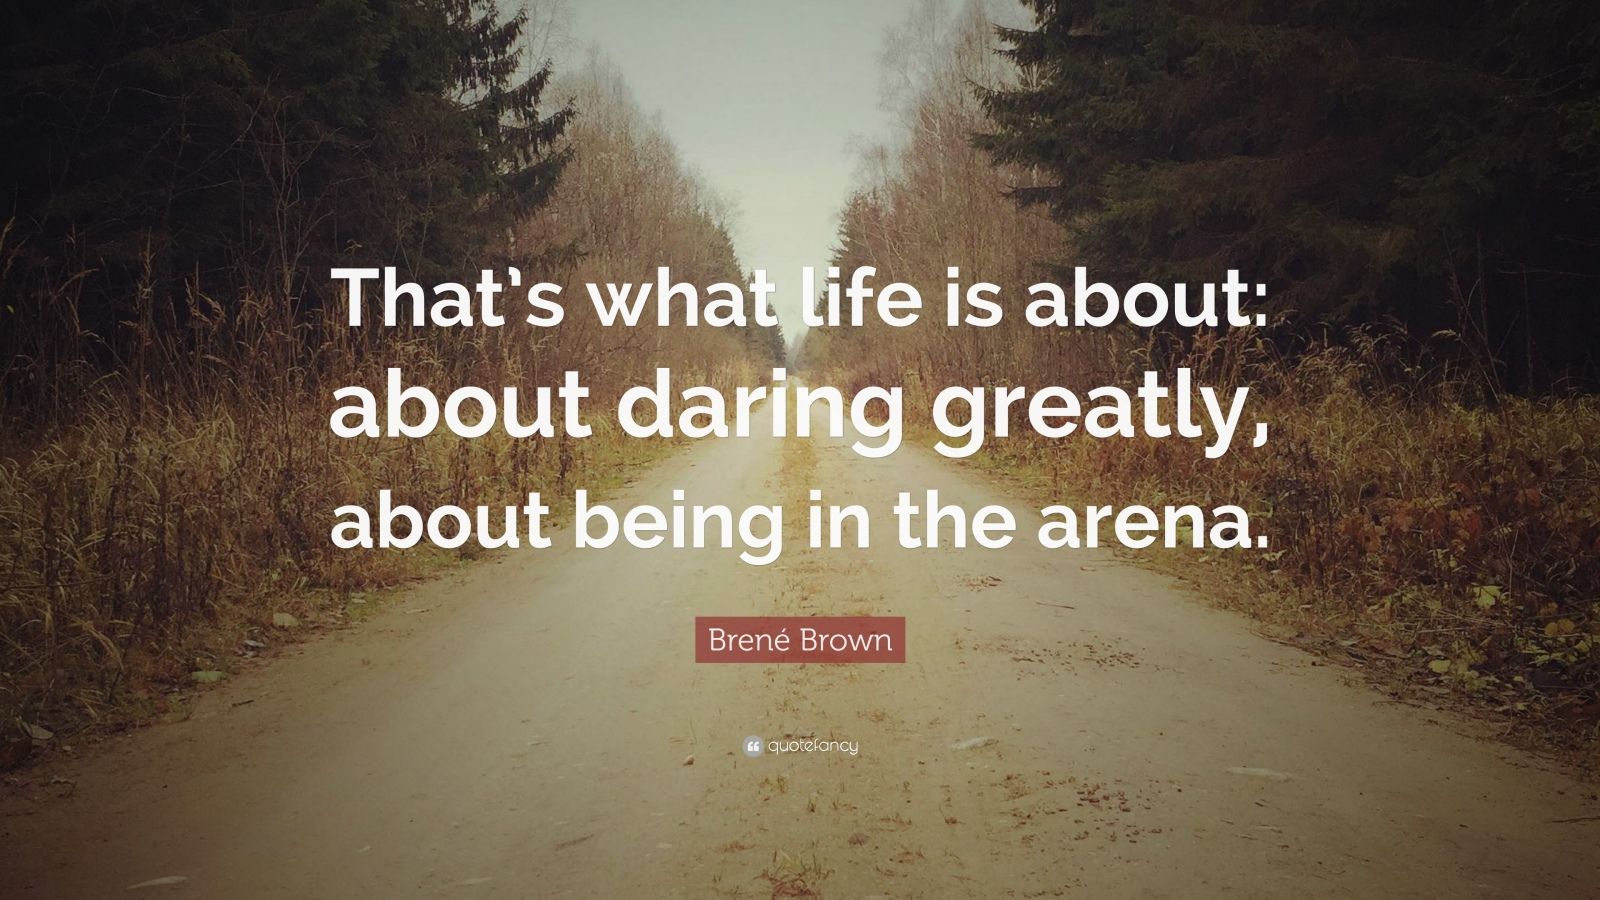 Brené Brown Quote: “That’s what life is about: about daring greatly